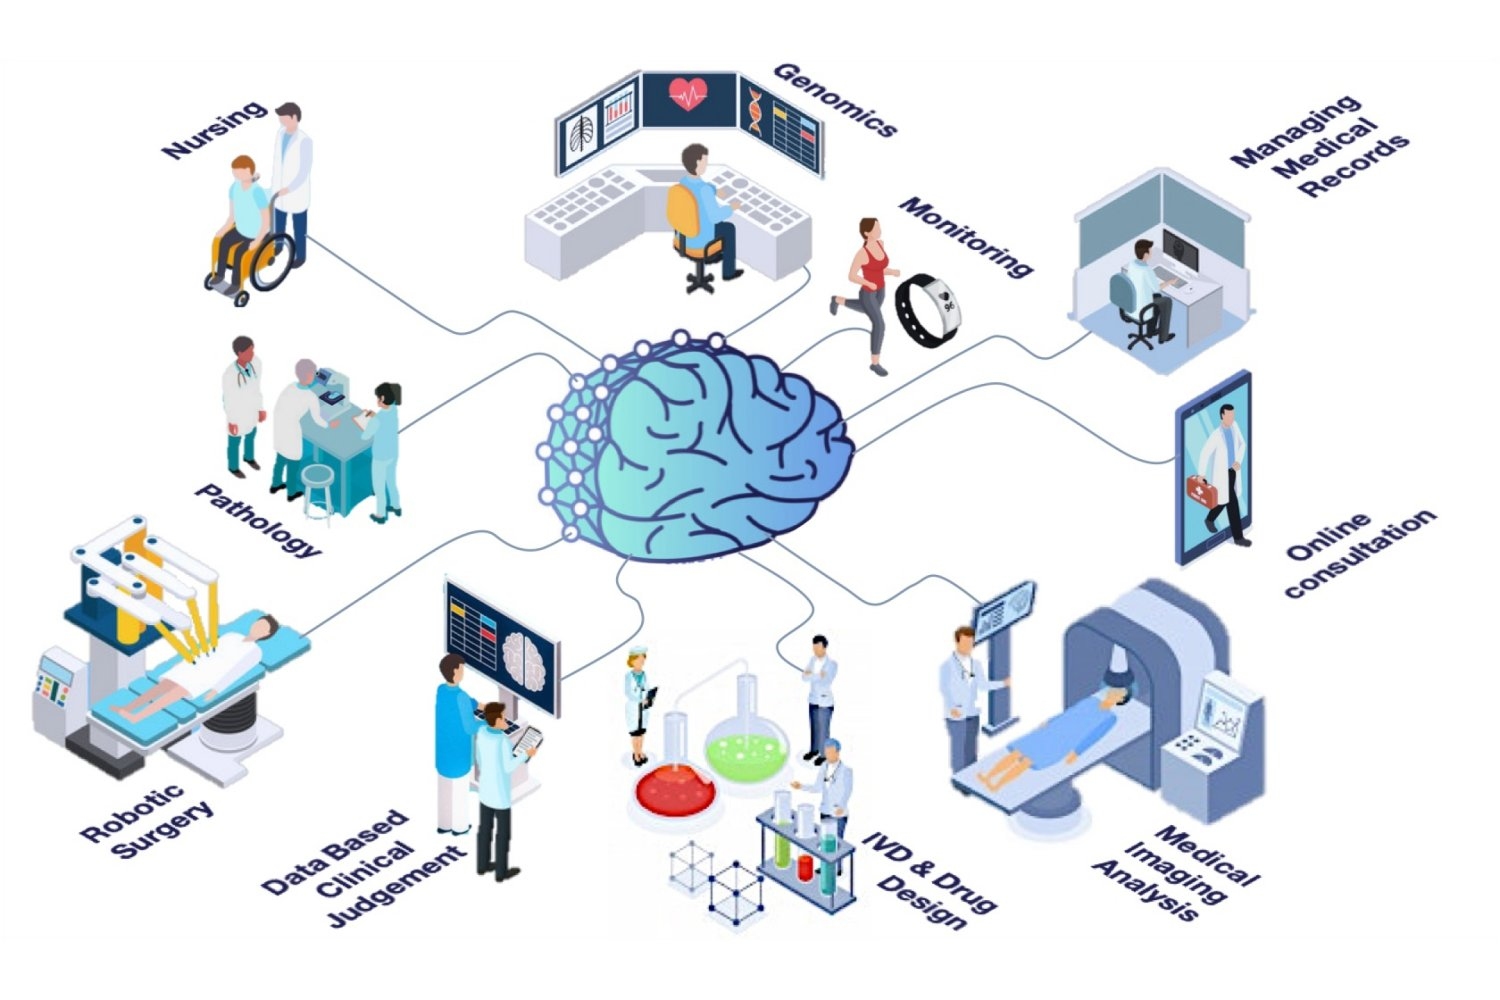 Artificial intelligence framework reveals nuance in performance of multimodal AI for health care